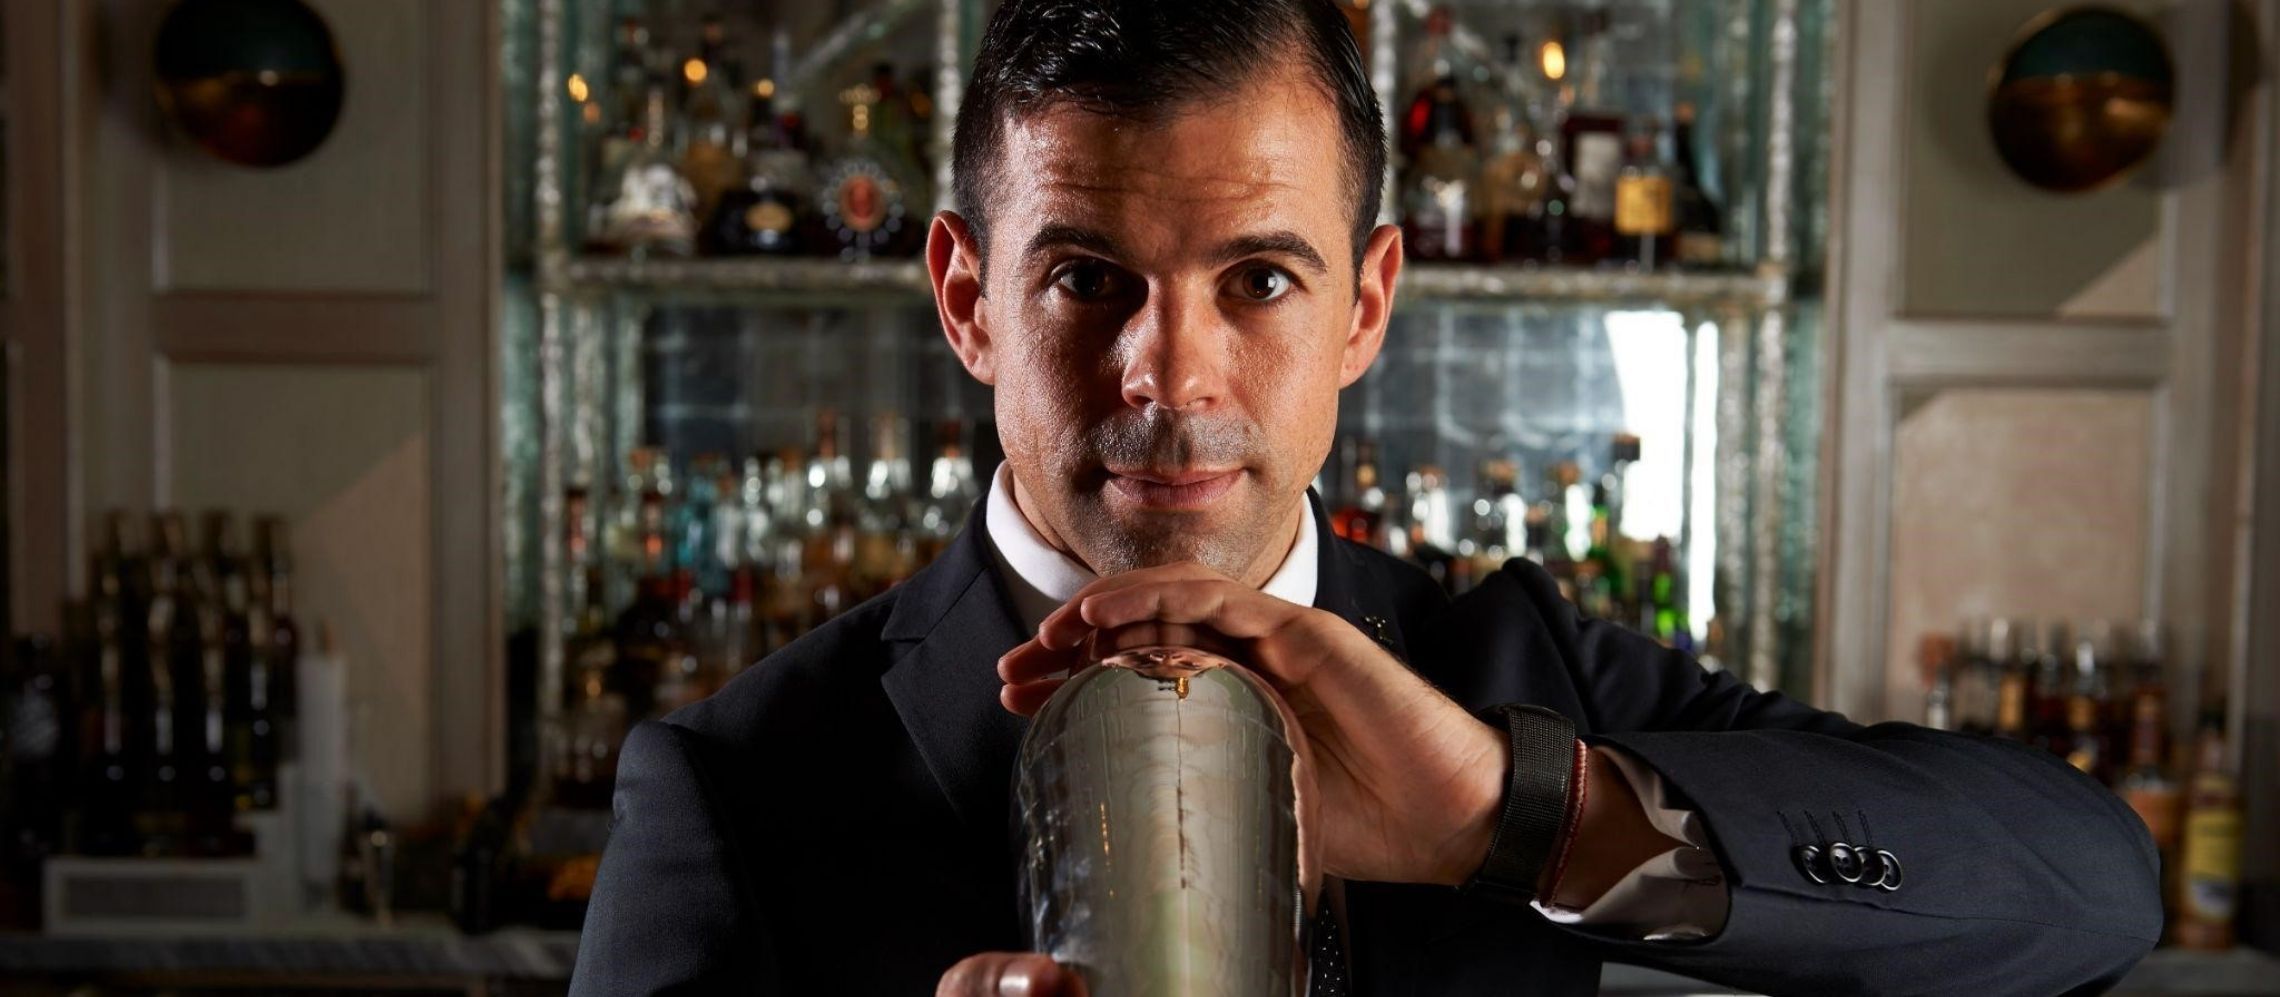 Photo for: Ago Perrone, Director of Mixology at The Connaught, joins the judging panel